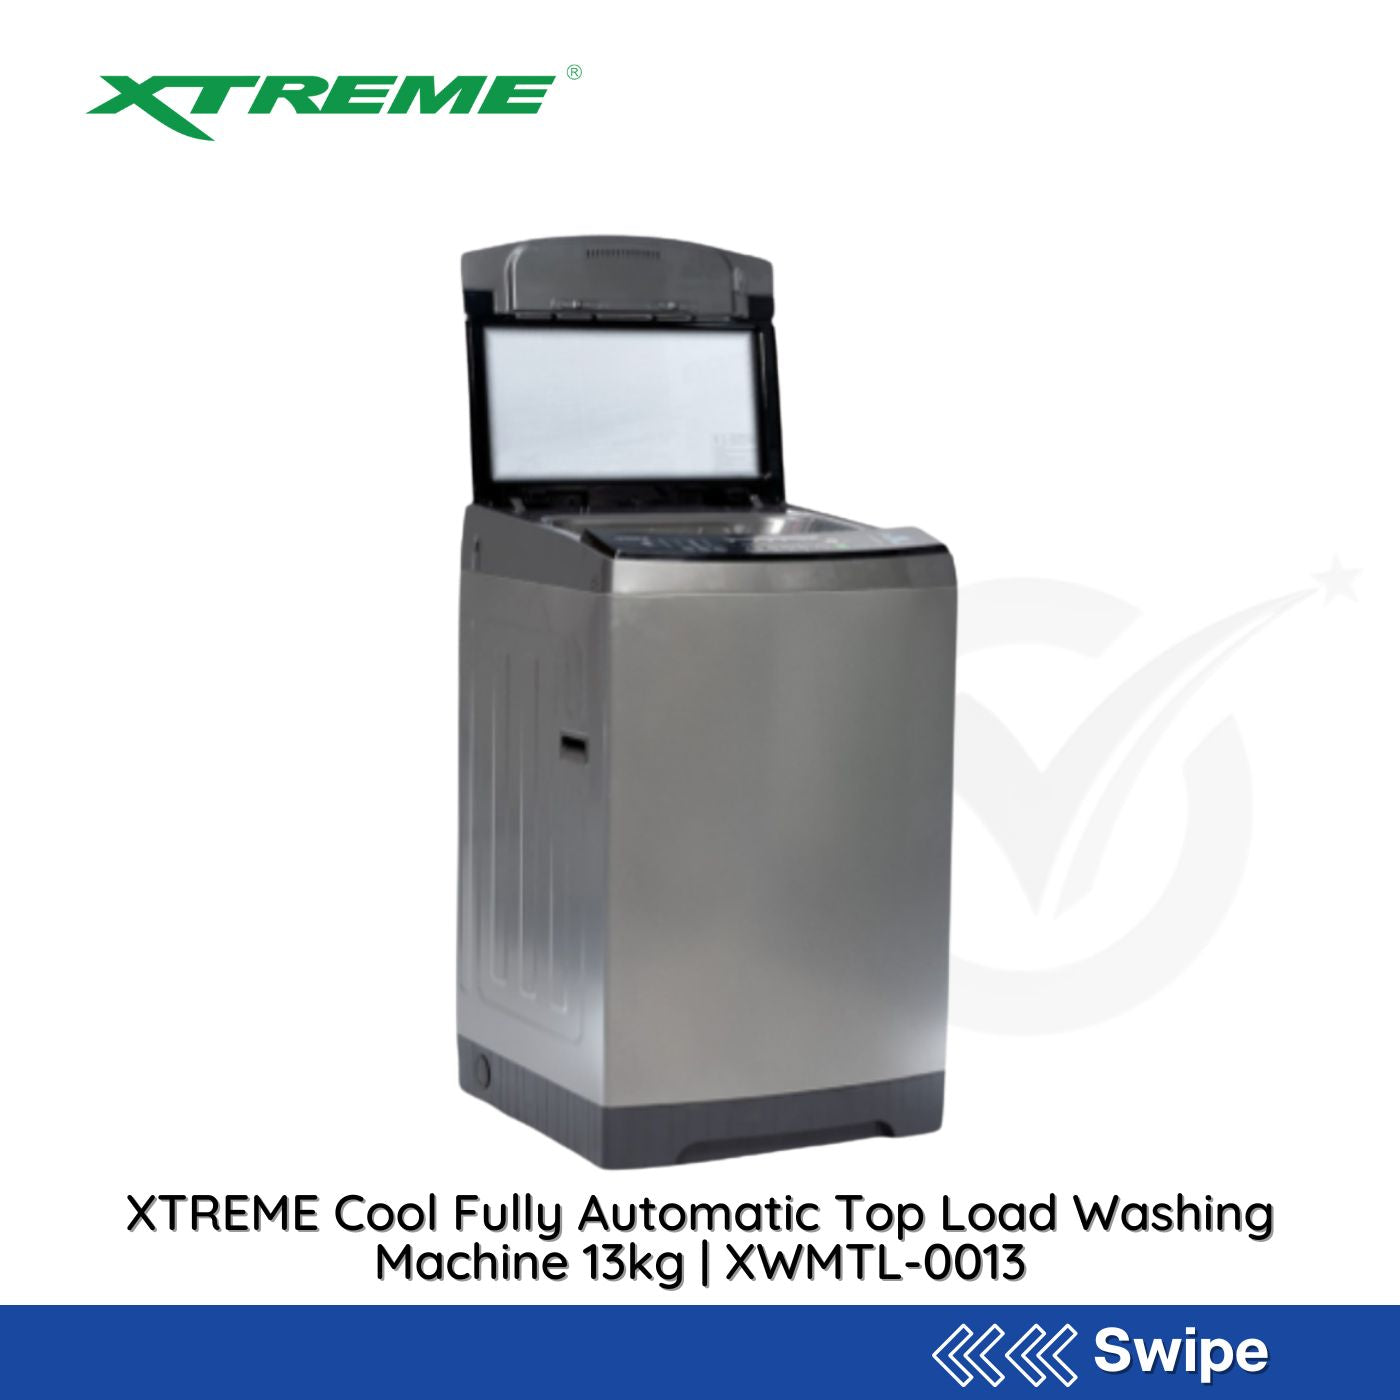 XTREME Cool Fully Automatic Top Load Washing Machine 13kg | XWMTL-0013